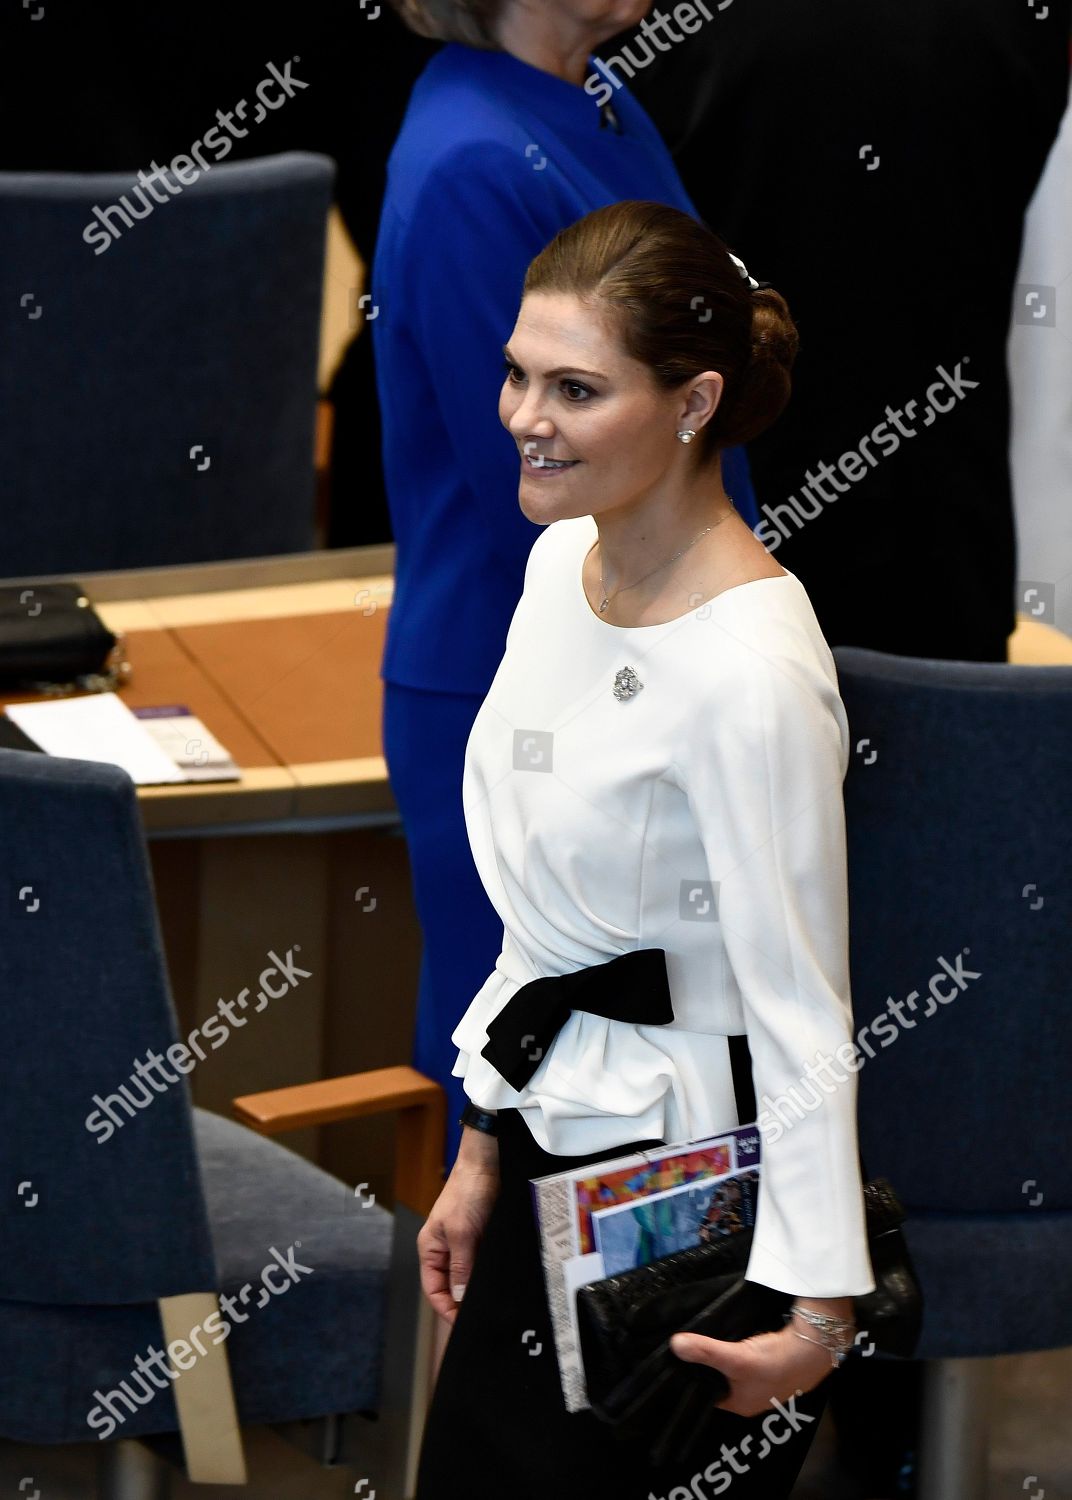 opening-of-the-parliamentary-session-stockholm-sweden-shutterstock-editorial-9894440g.jpg